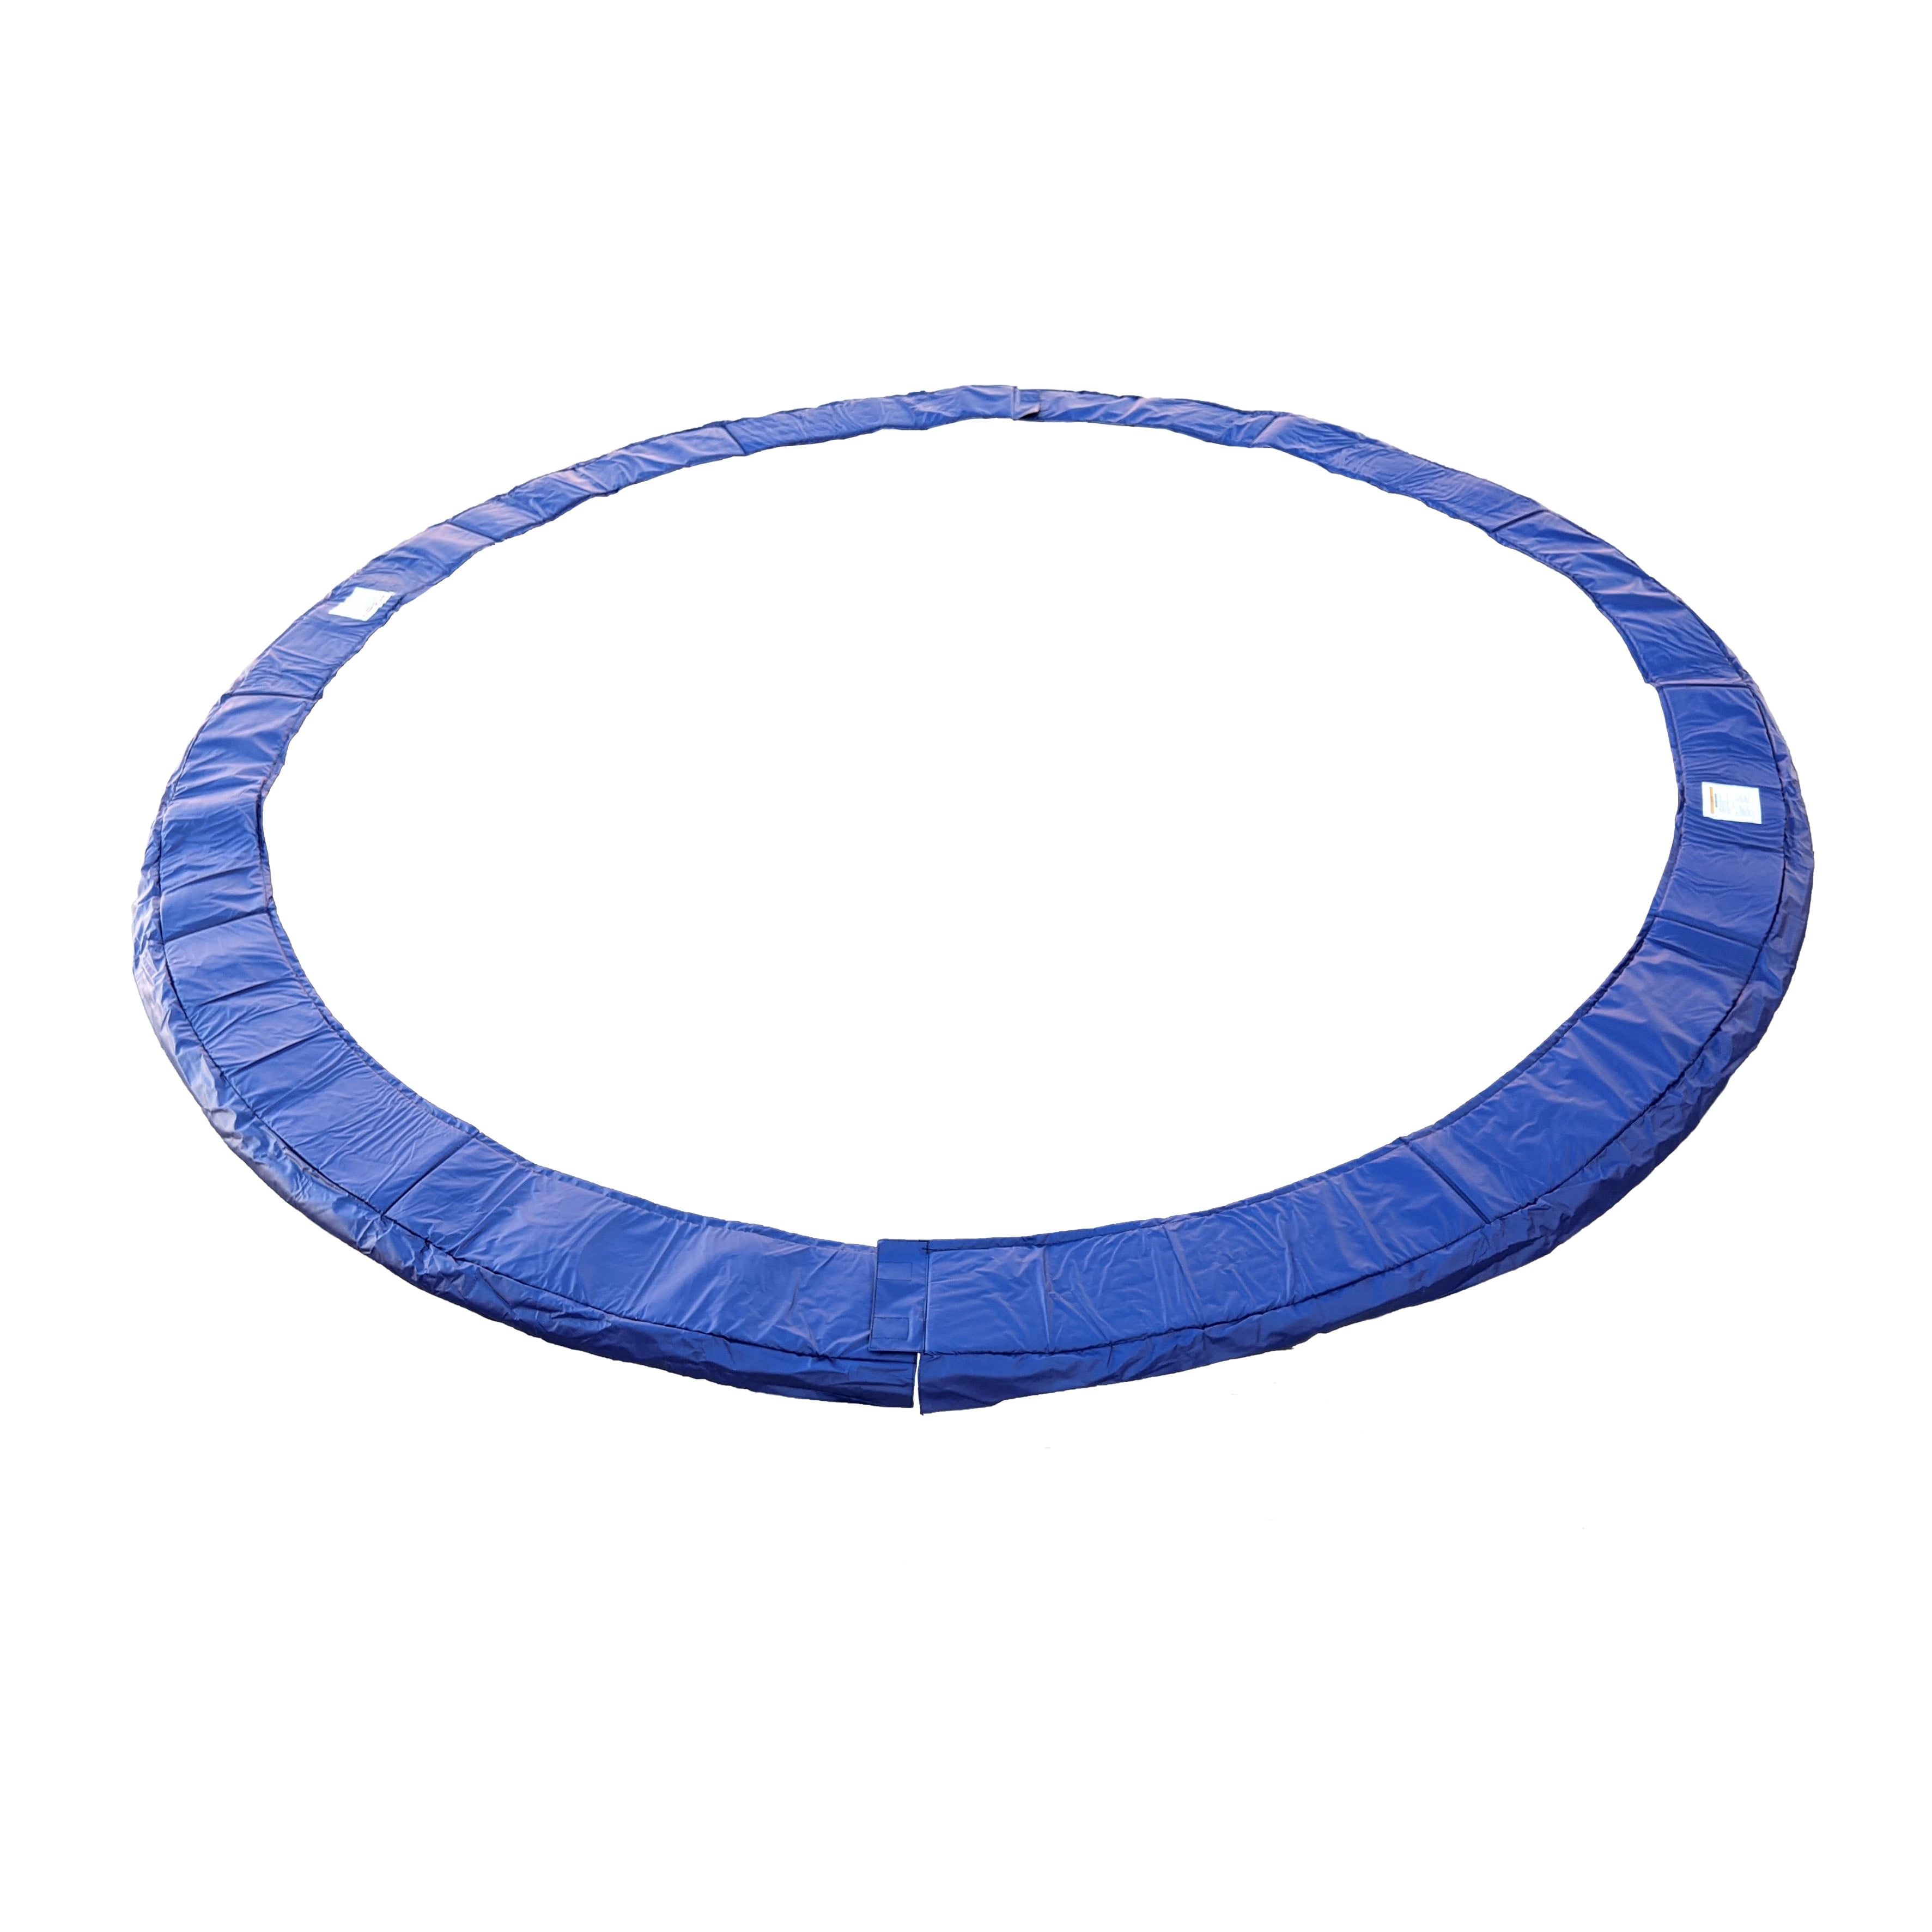 BodyRip Replacement PVC Trampoline Safety Cover Pad Mat Foam 8FT 10FT 12FT 14FT 